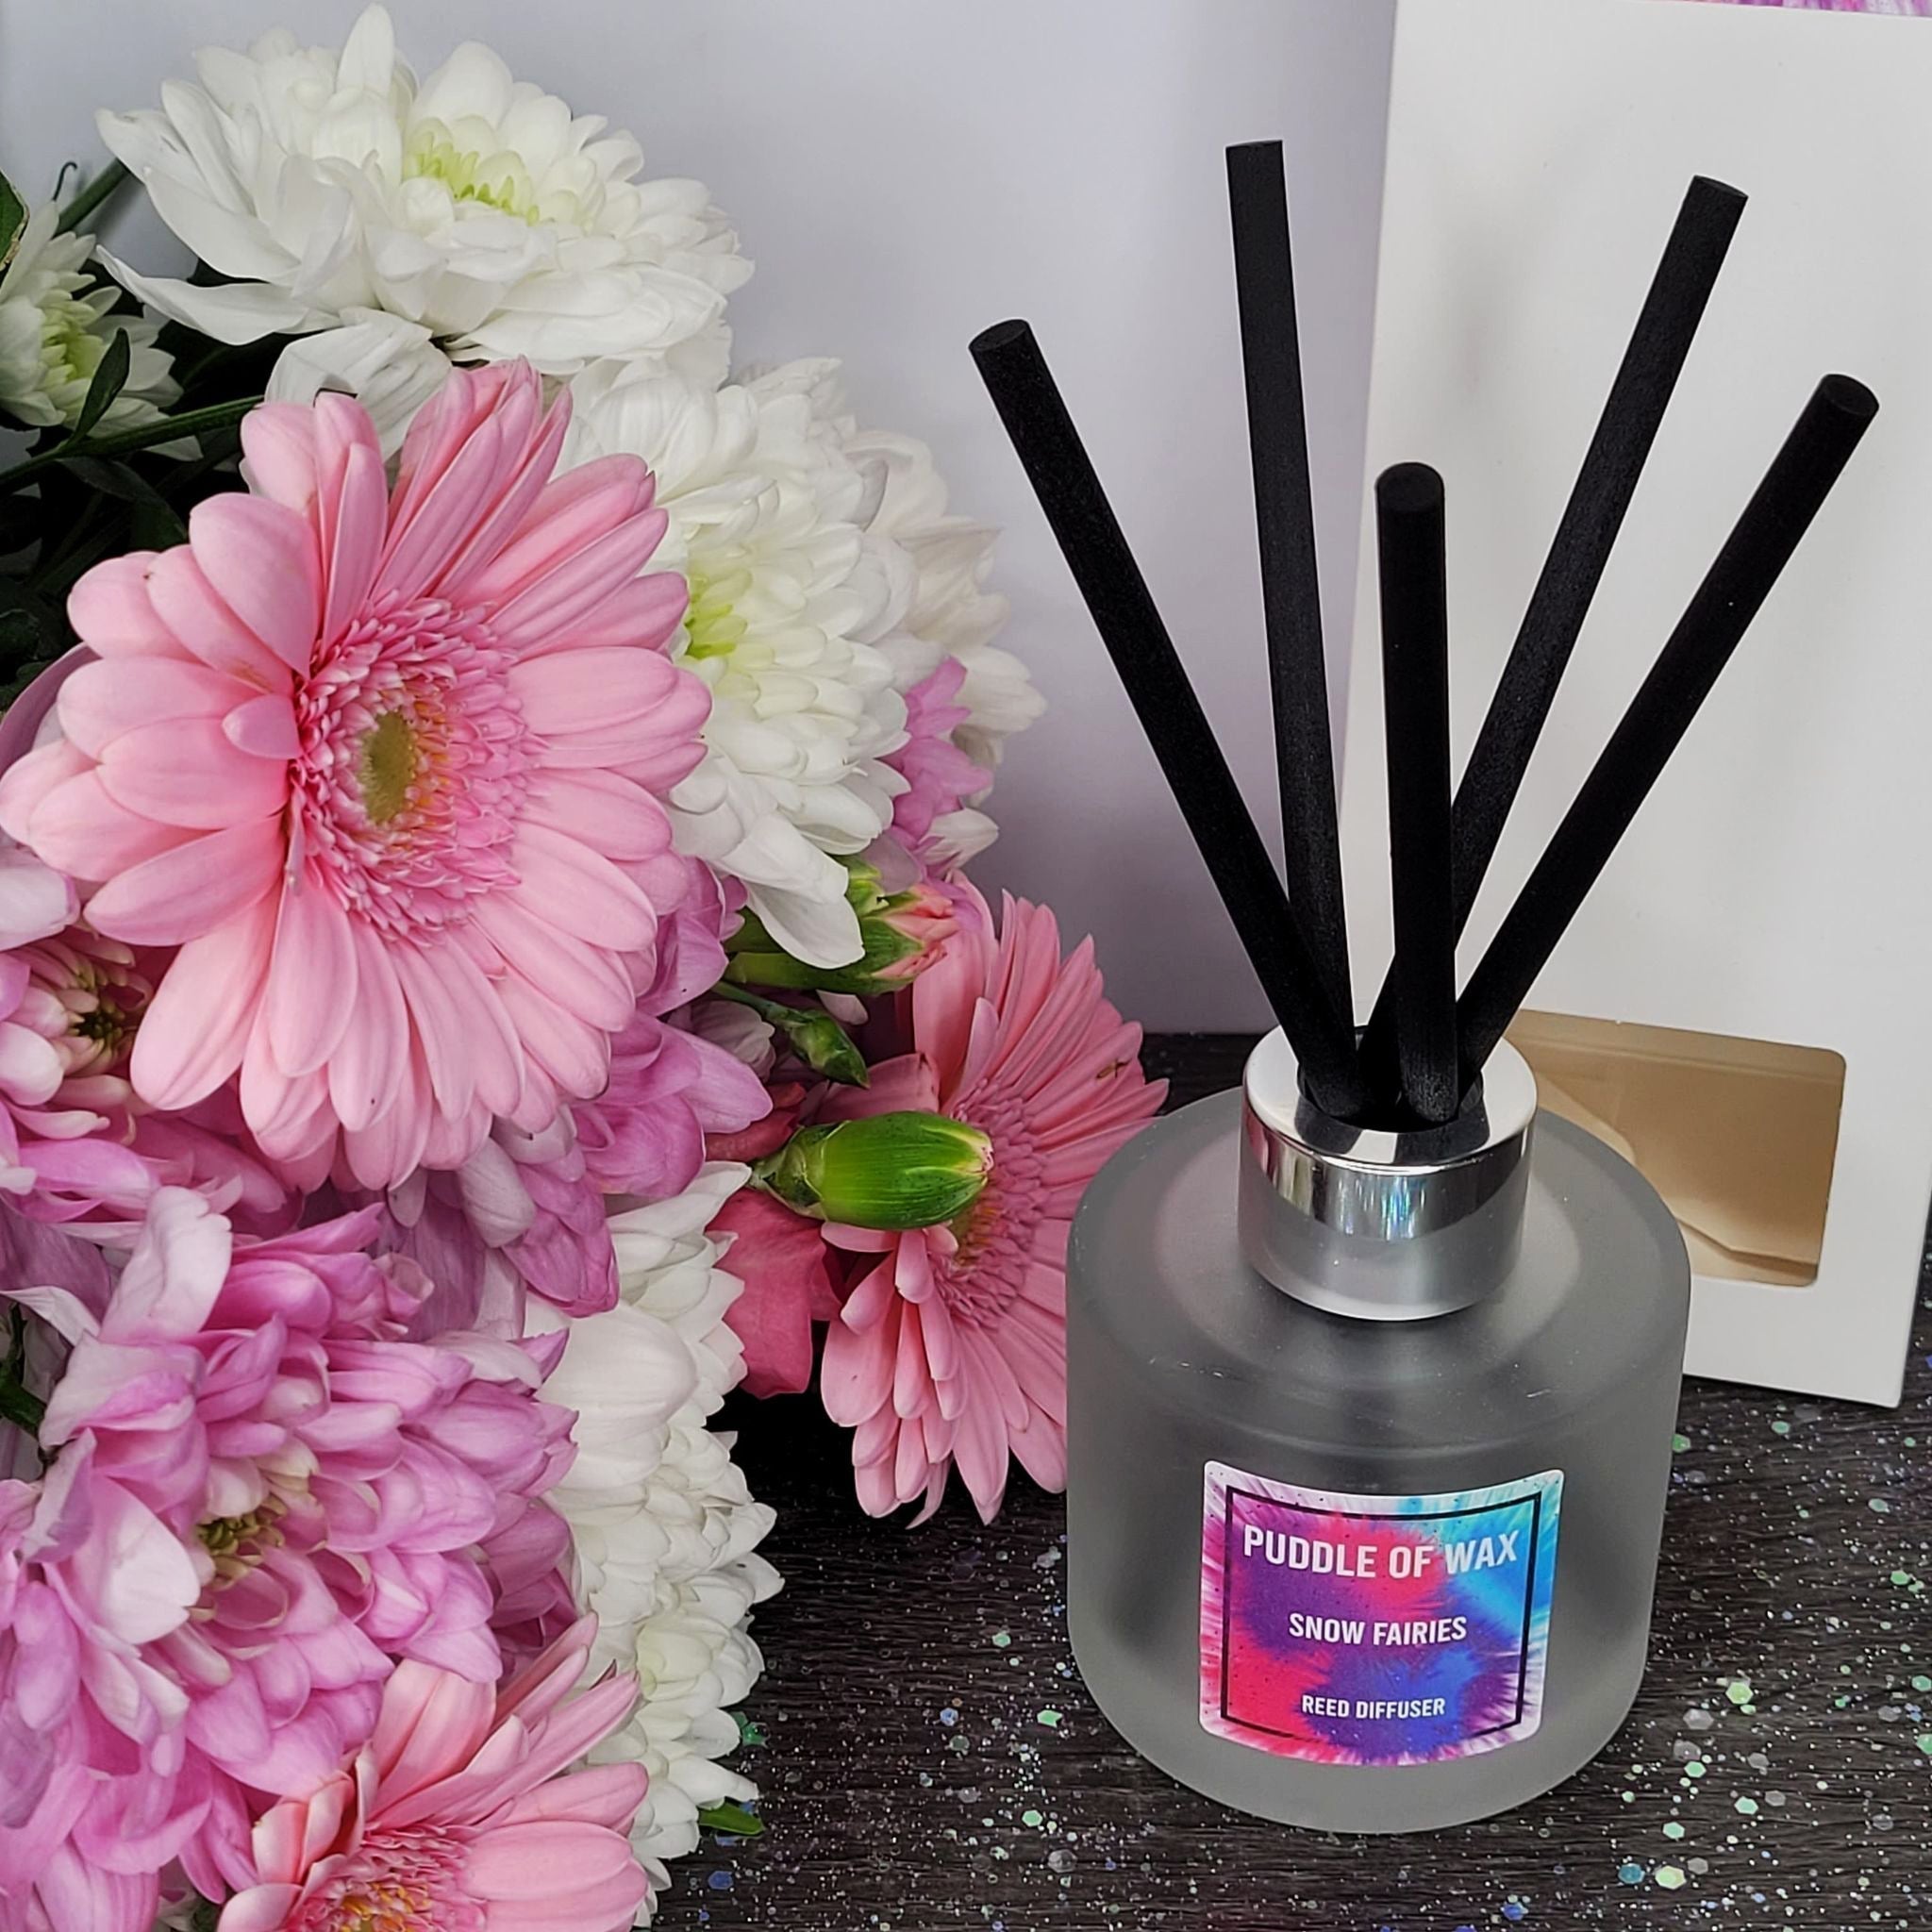 Tropical Island Reed Diffuser